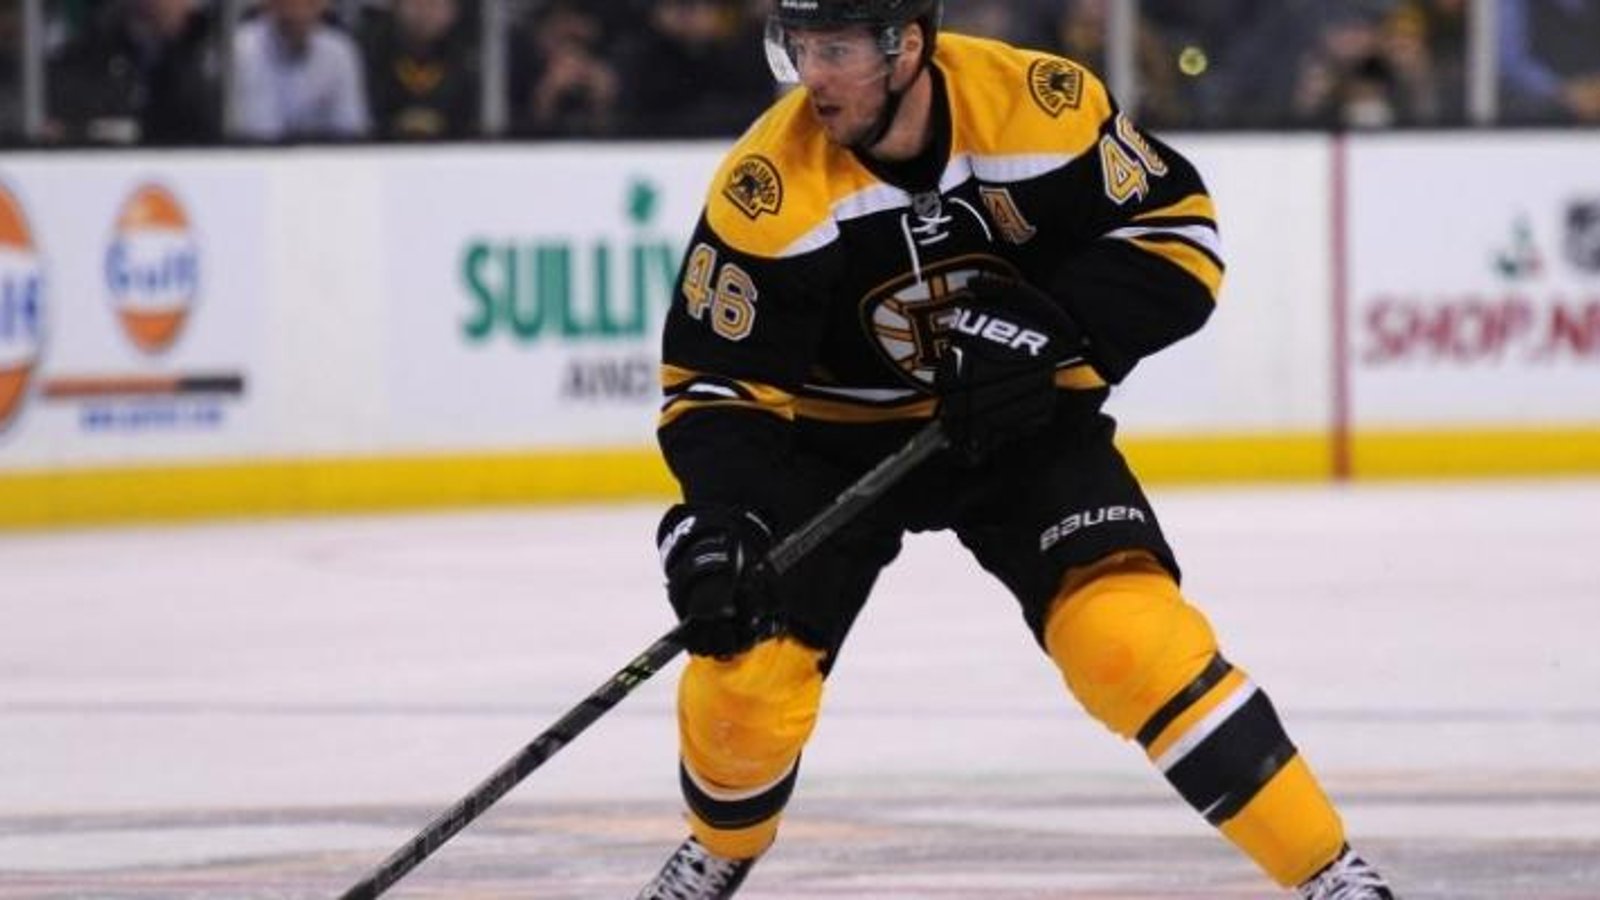 Where Is David Pastrnak Playing?